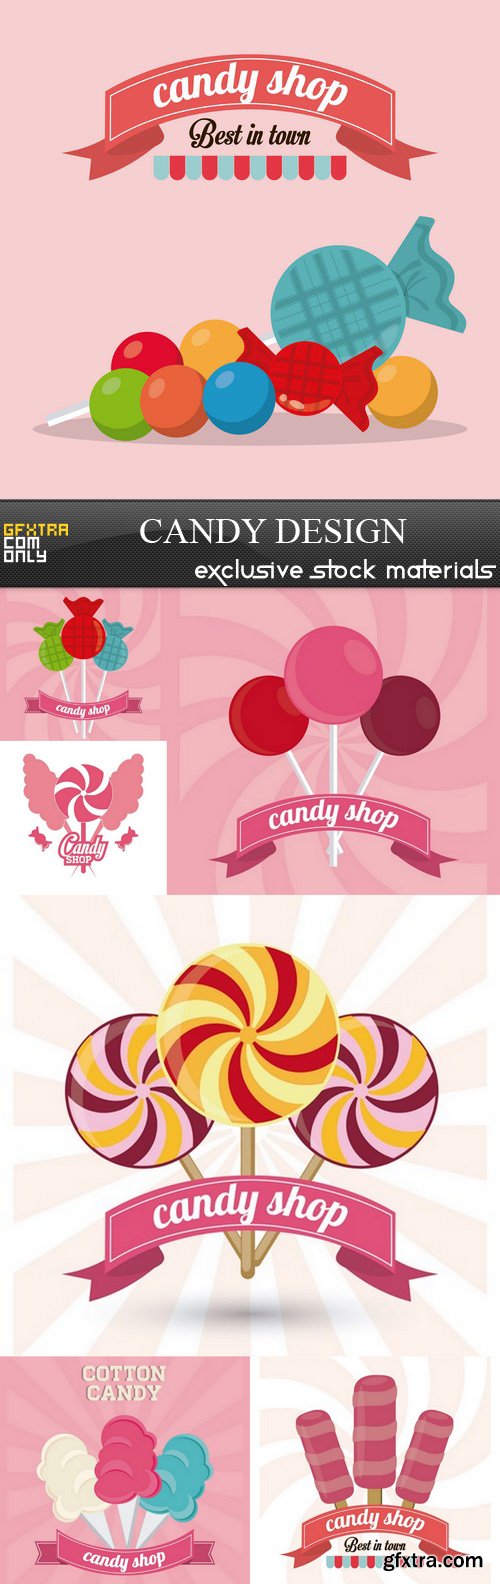 Candy Design - 7 EPS